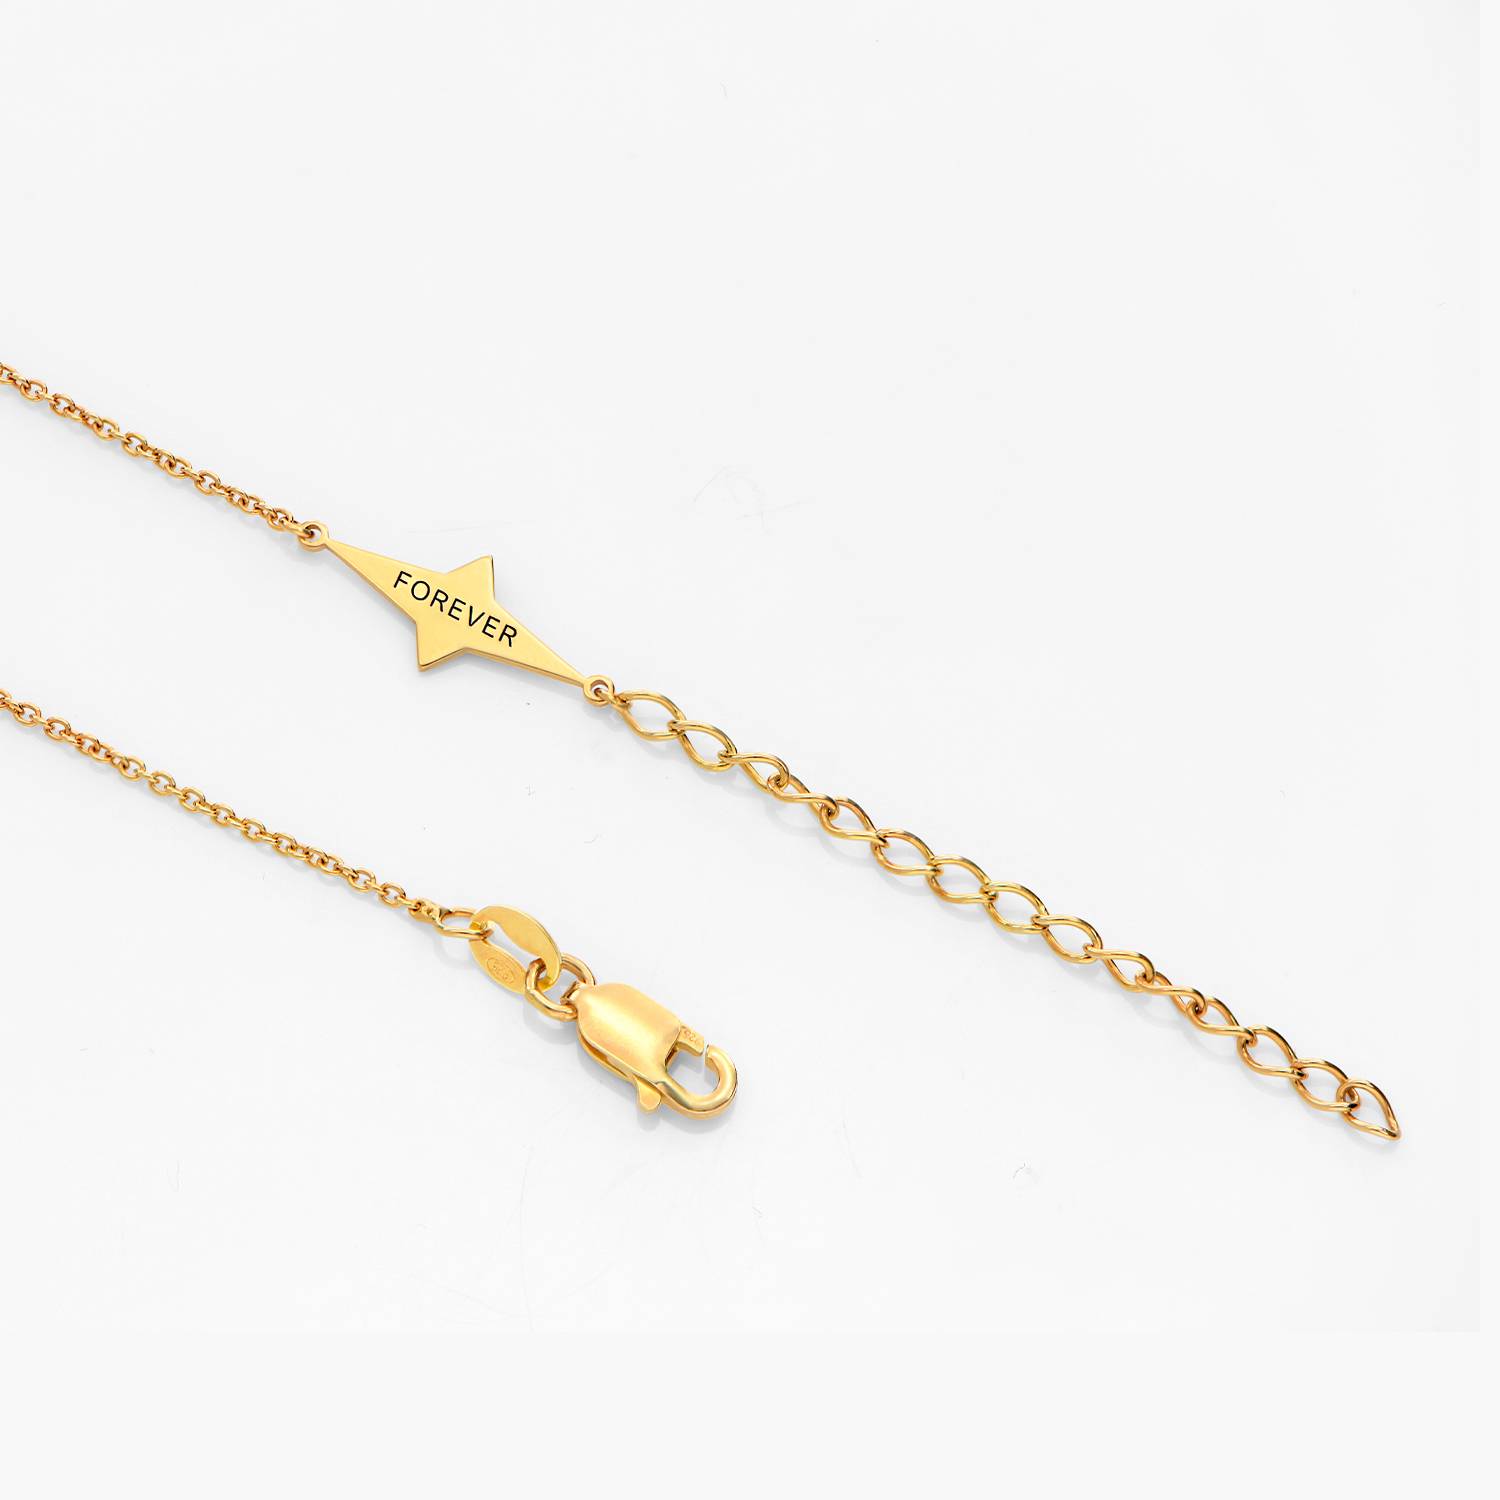 Northern Star Necklace with engraving - Gold Vermeil-3 product photo